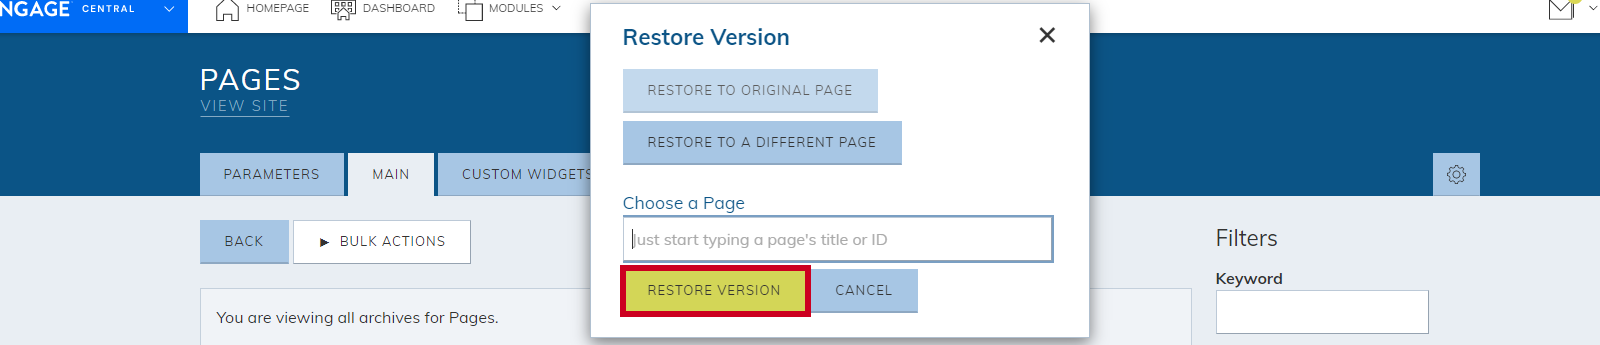 restore_version.png